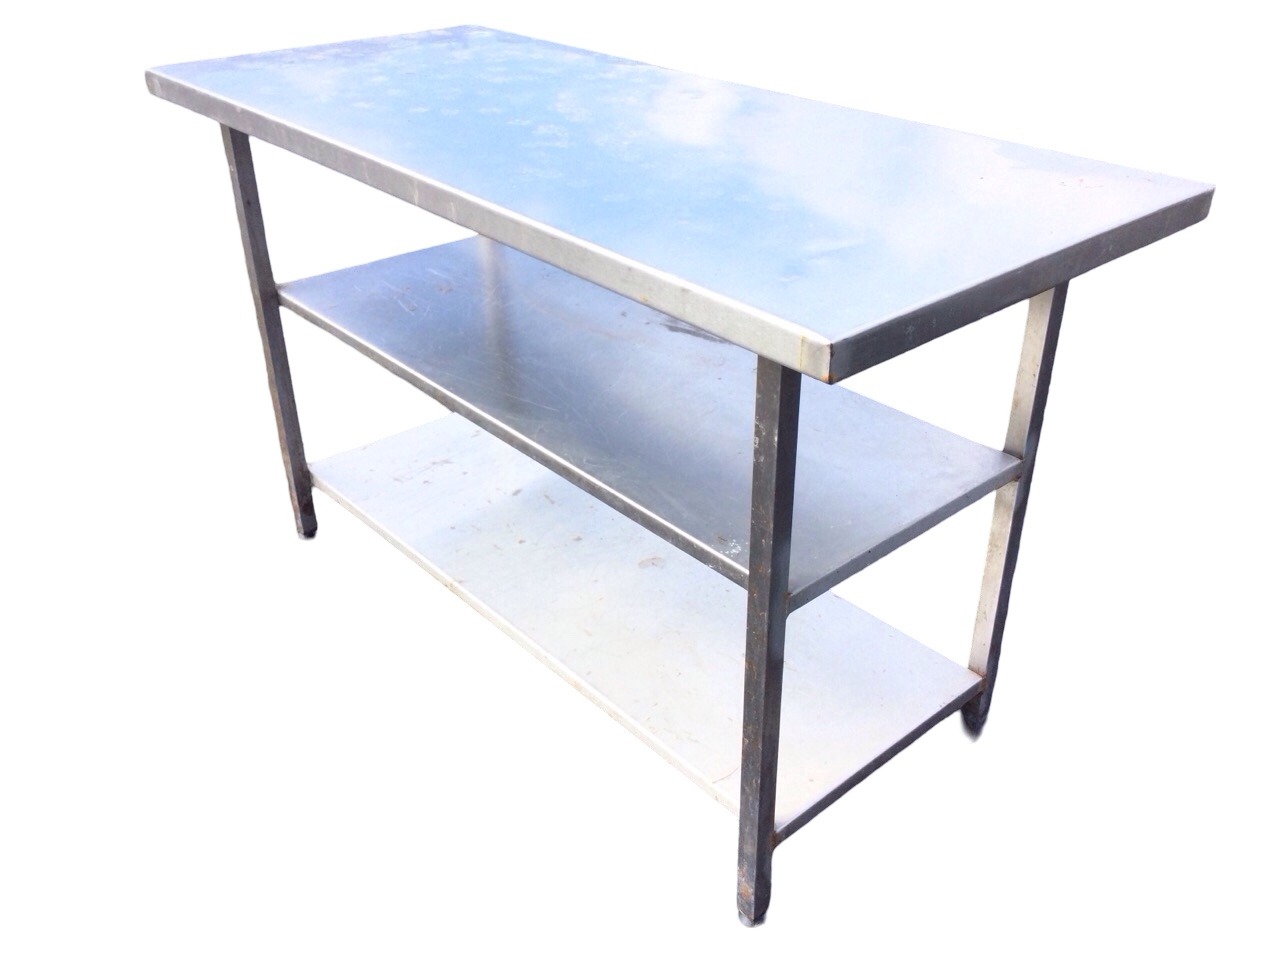 A rectangular stainless steel counter with platform top and two shelves below, supported on square